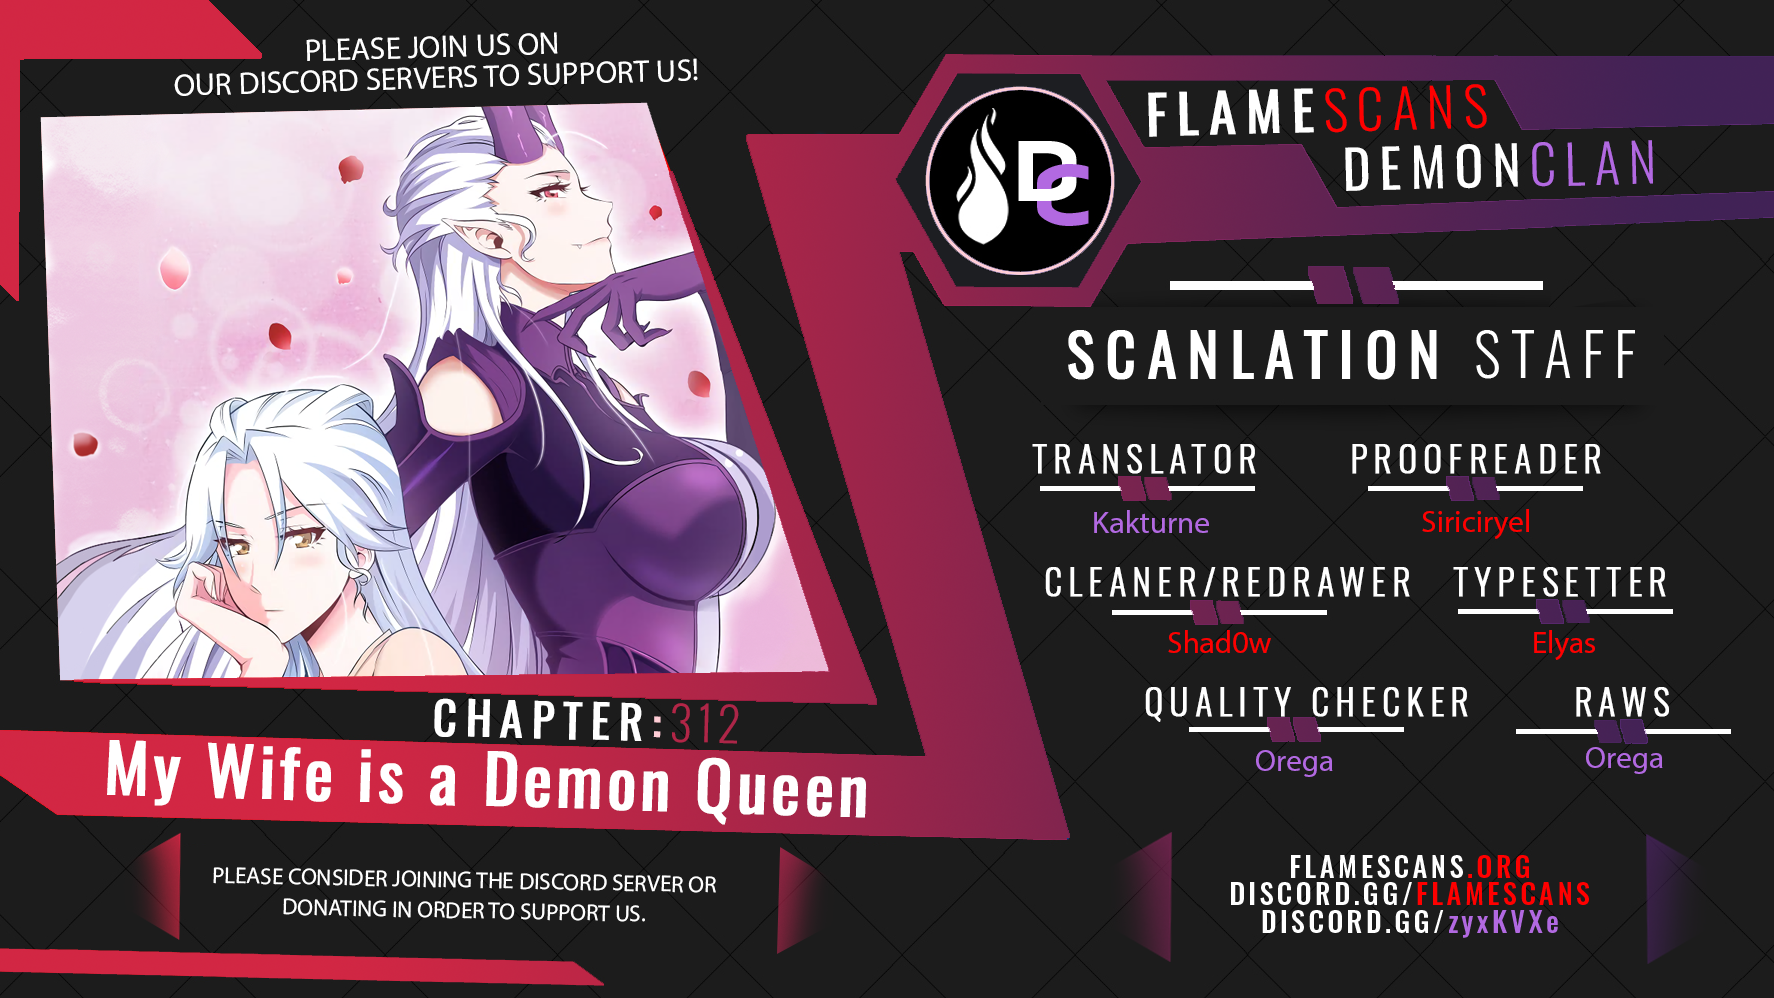 My Wife is a Demon Queen - Chapter 12819 - Image 1